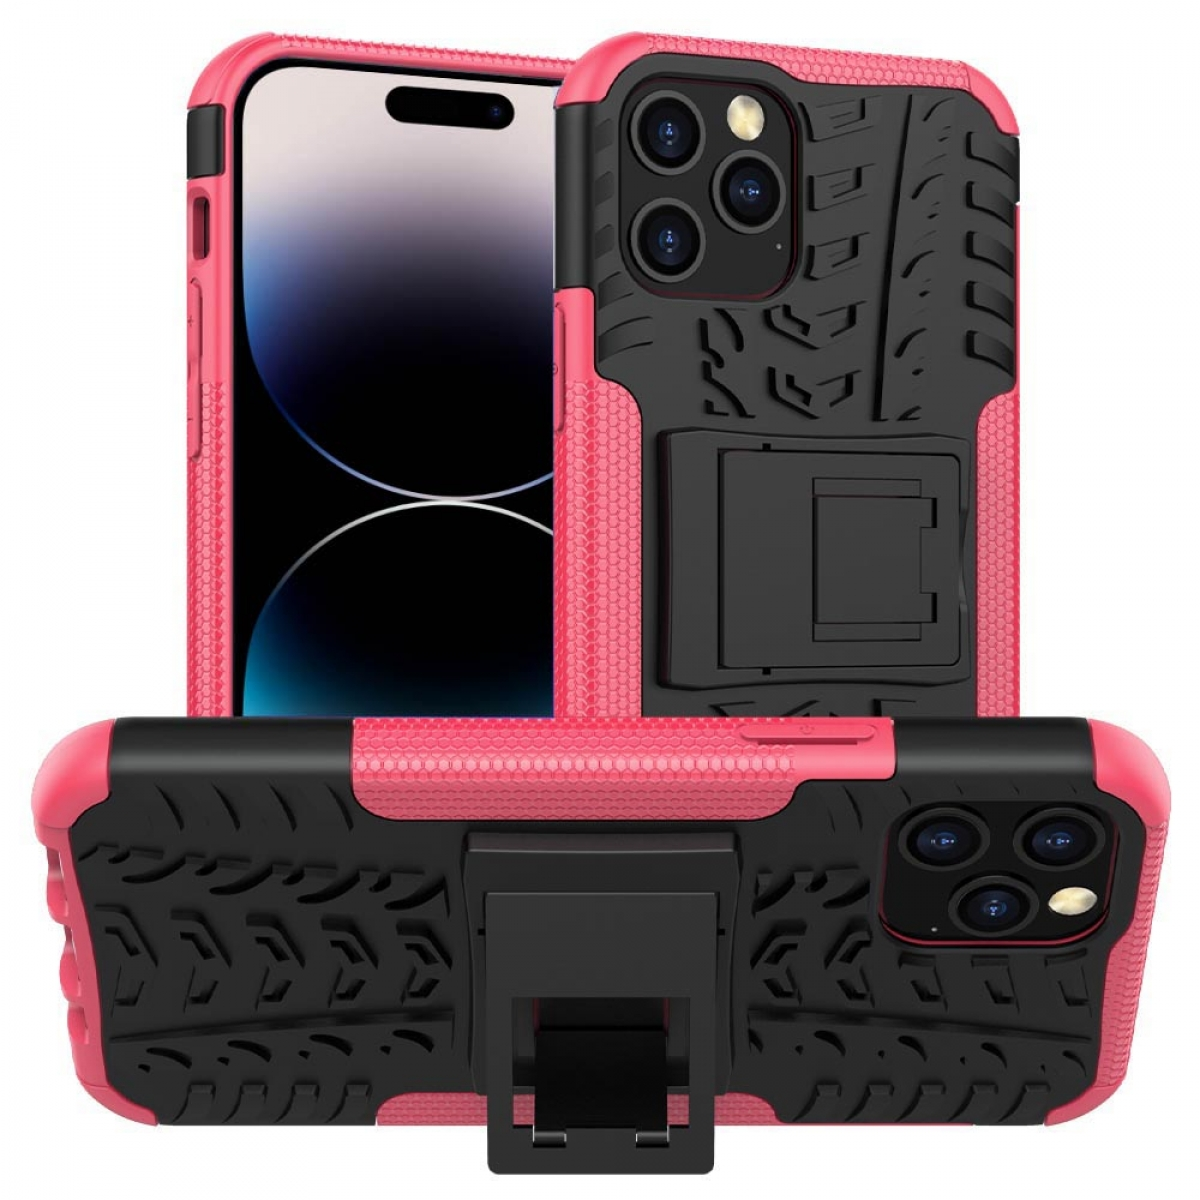 iPhone Apple, Pro, 2i1, Rosa CASEONLINE Backcover, 14